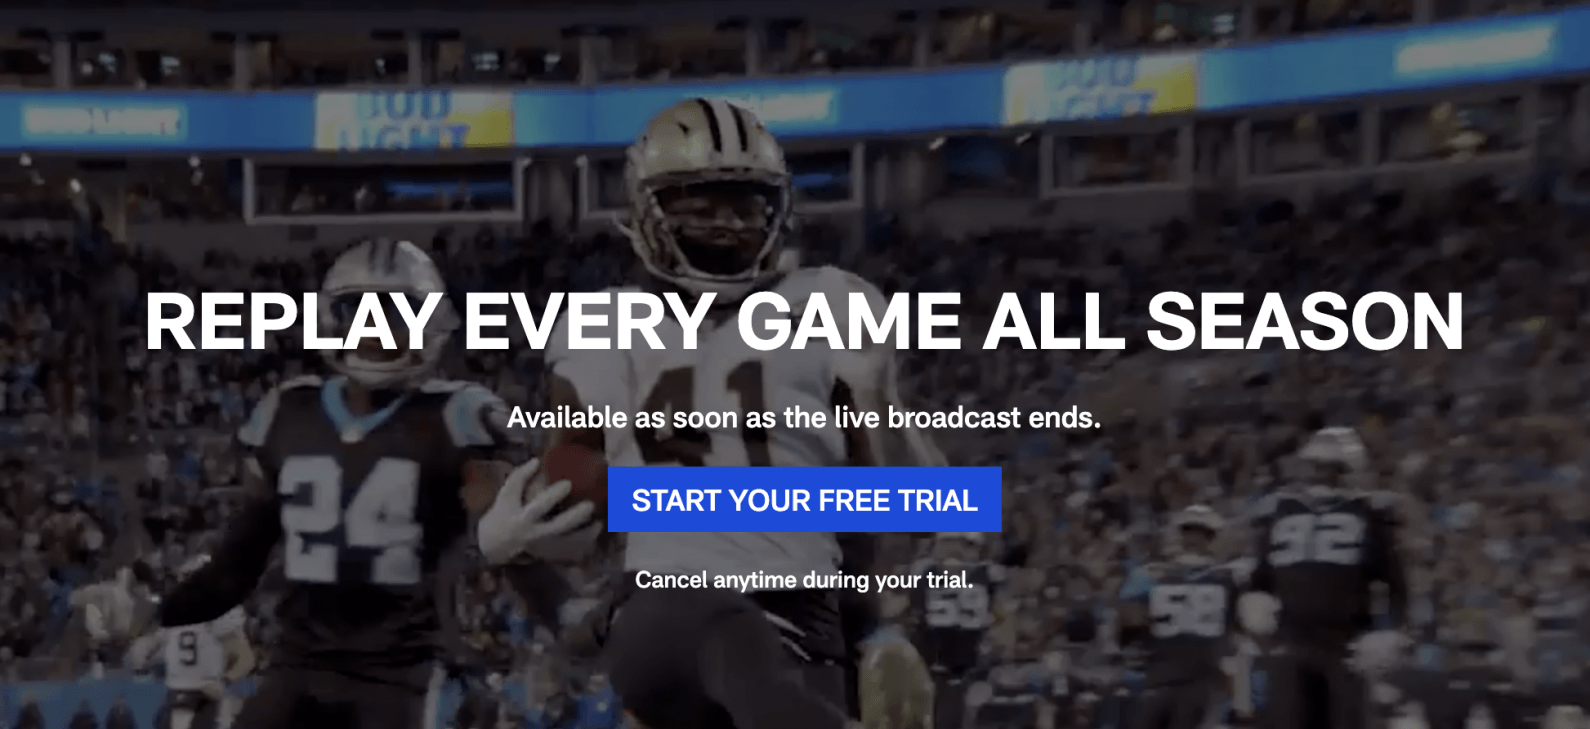 sign up for nfl game pass